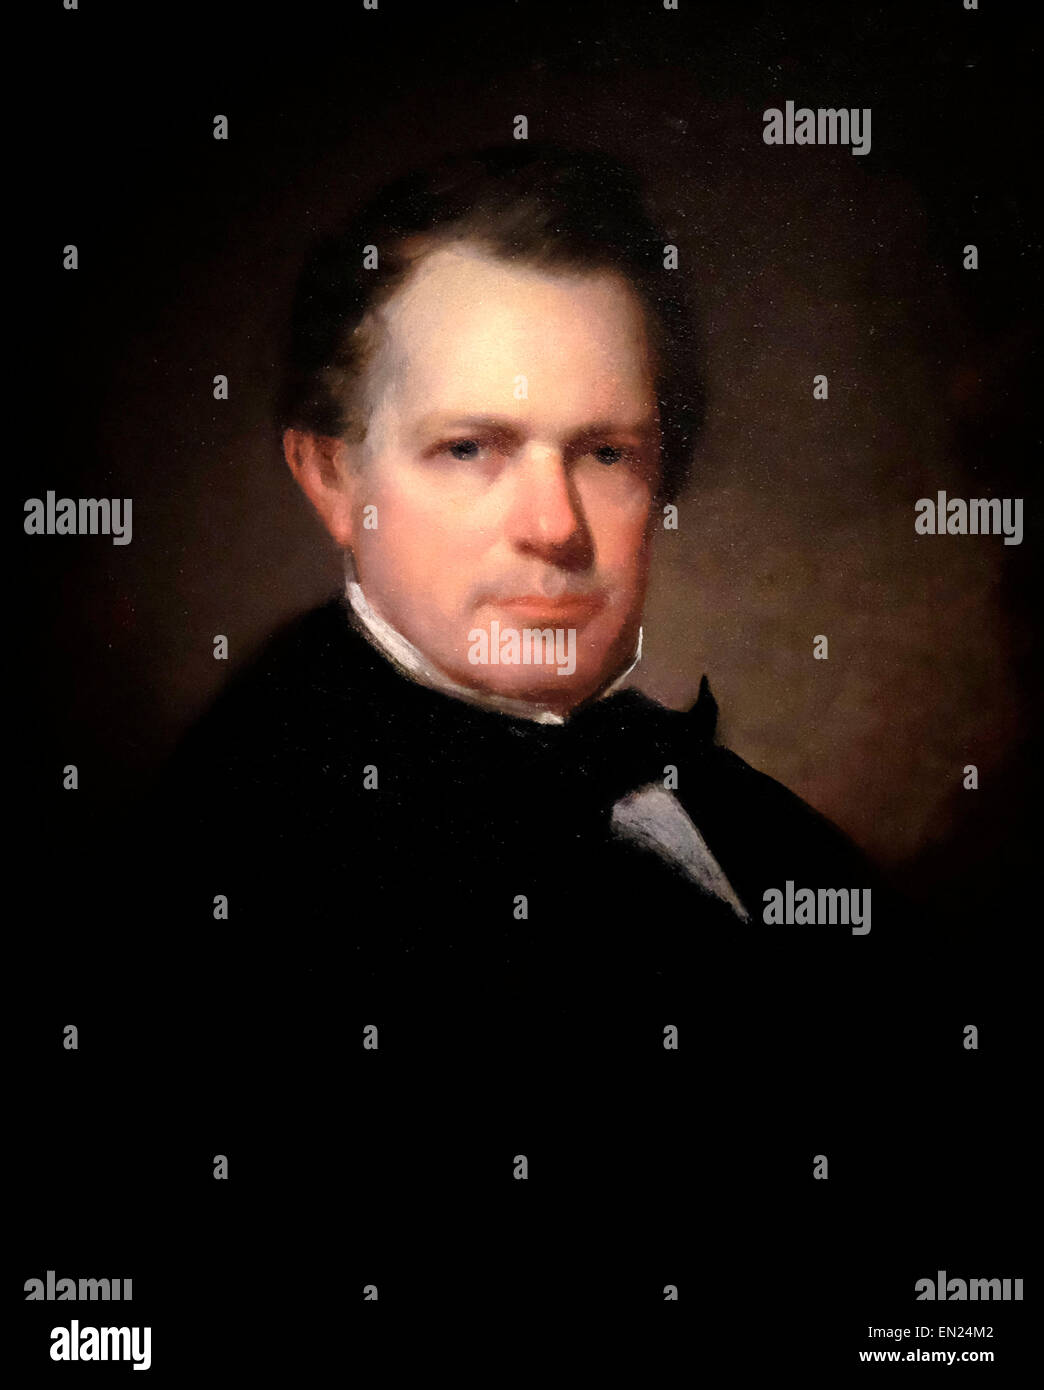 William Gilmore Simms - William Gilmore Simms was a poet, novelist and historian from the American South. His writings achieved great prominence during the 19th century, with Edgar Allan Poe pronouncing him the best novelist America had ever produced. Stock Photo